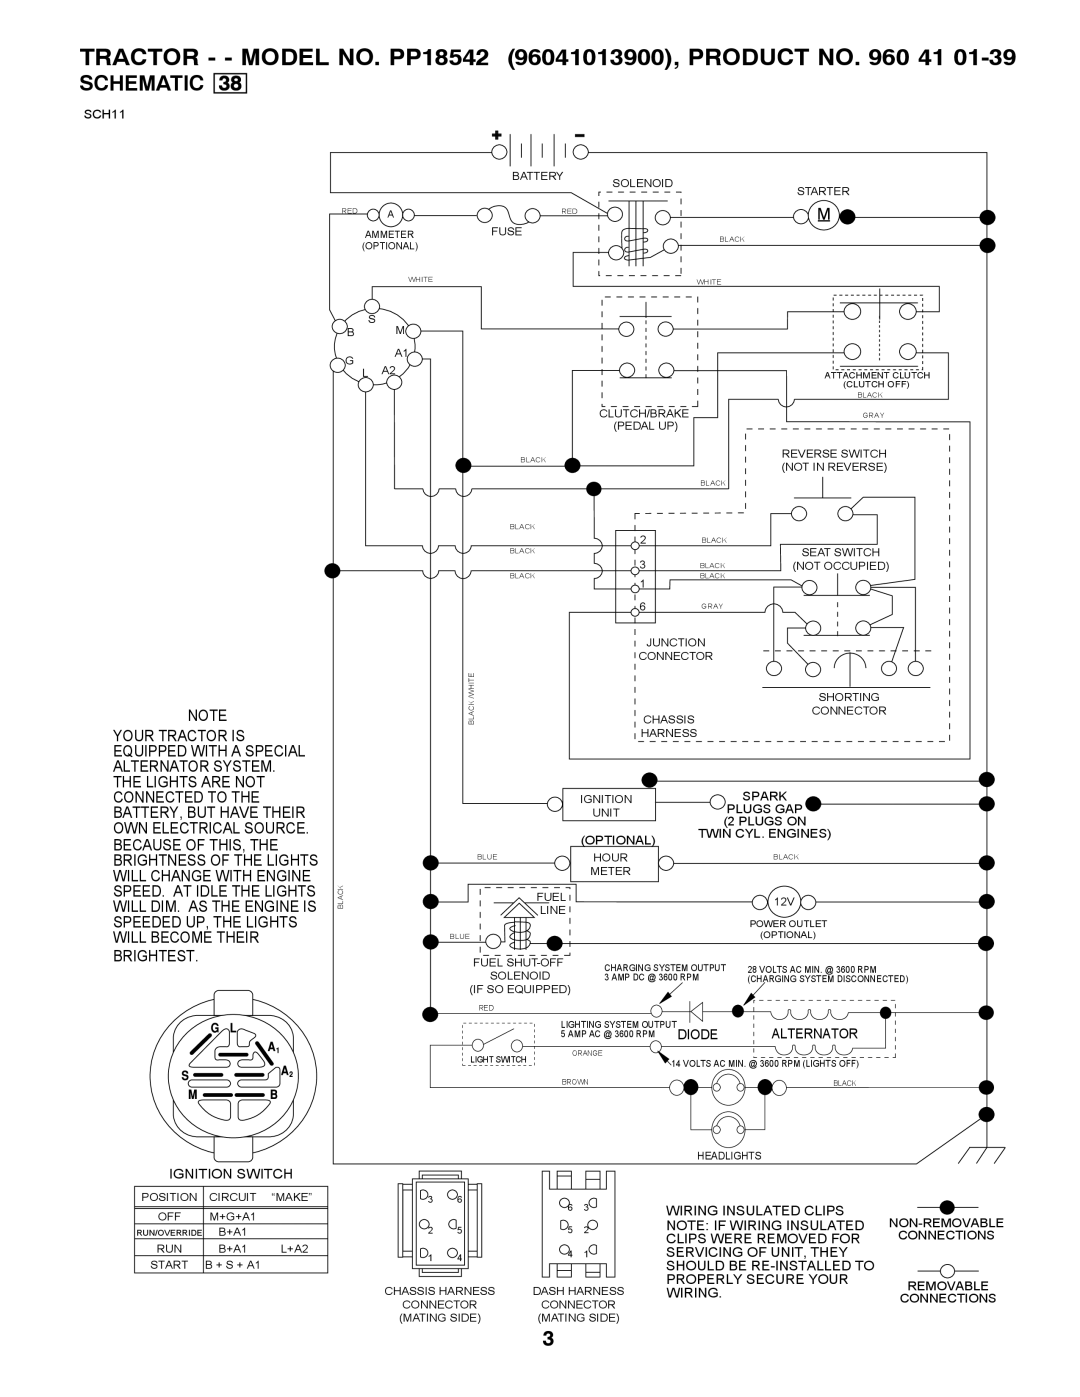 Poulan 960 41 01-39 manual Schematic, TRACTOR - - MODEL NO. PP18542 96041013900, PRODUCT NO. 960 41, Diode, Ignition Switch 